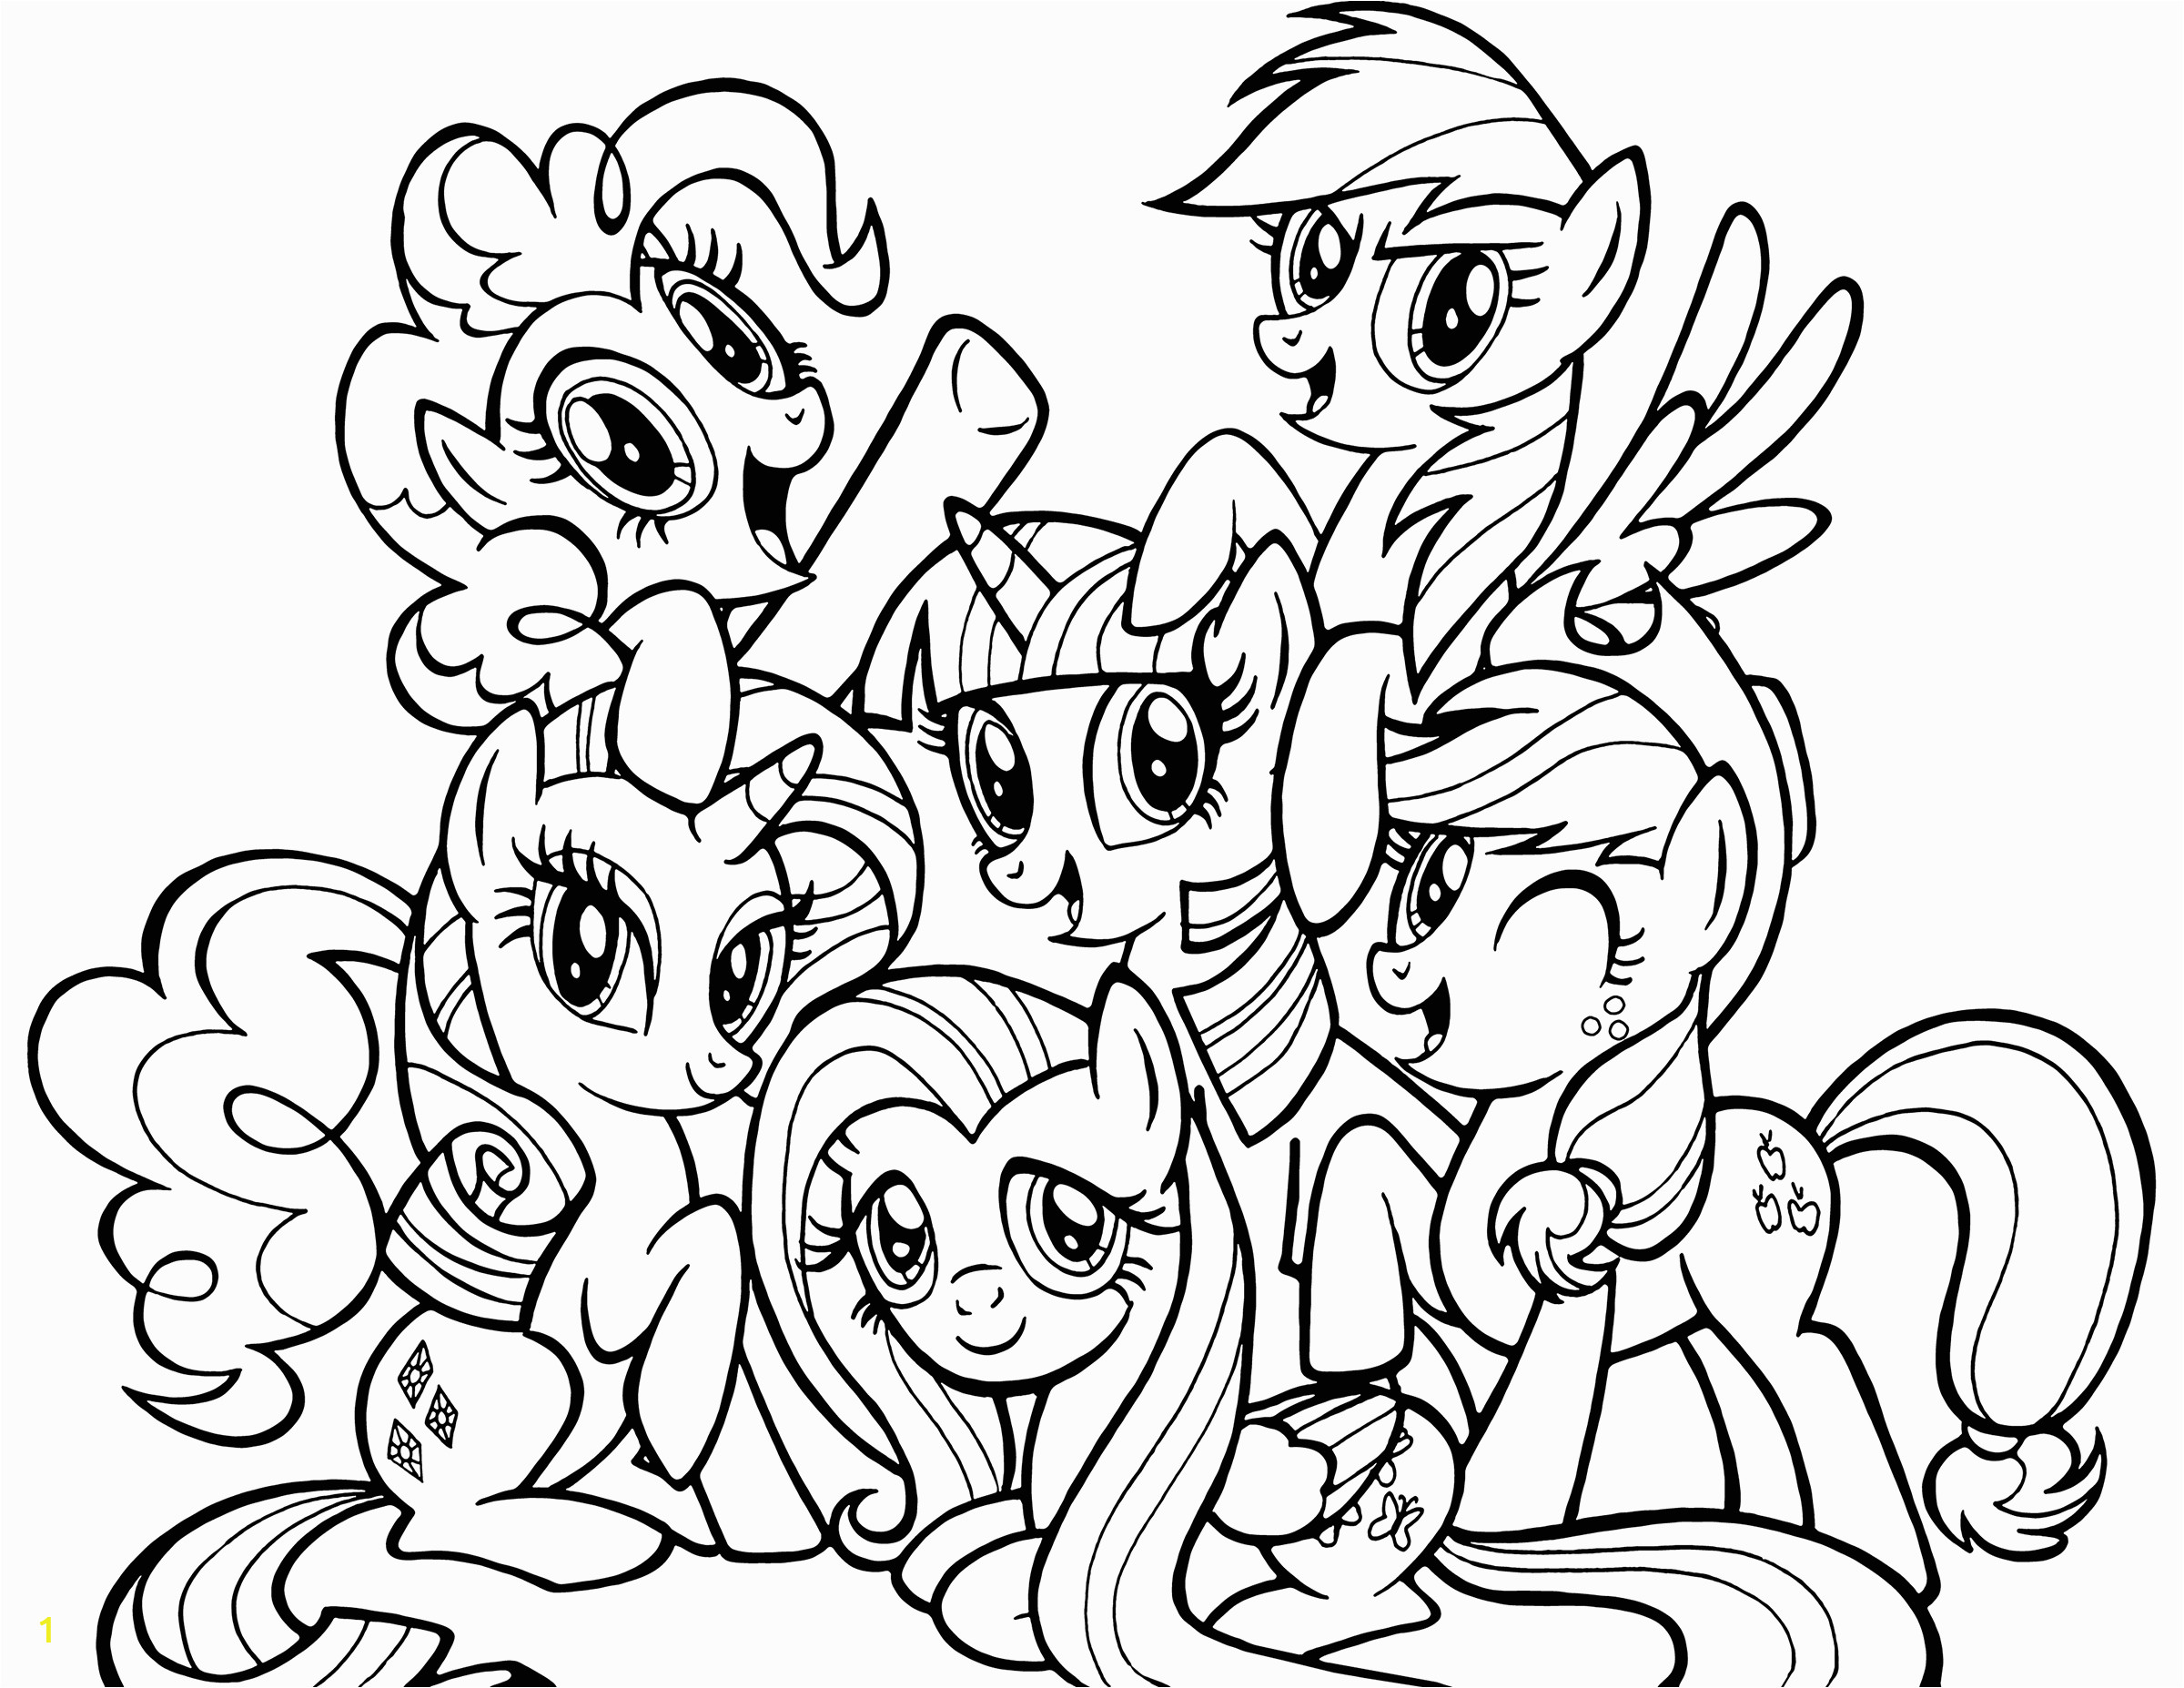 Free Printable My Little Pony Coloring Pages Ponies From Ponyville Coloring Pages Free Printable